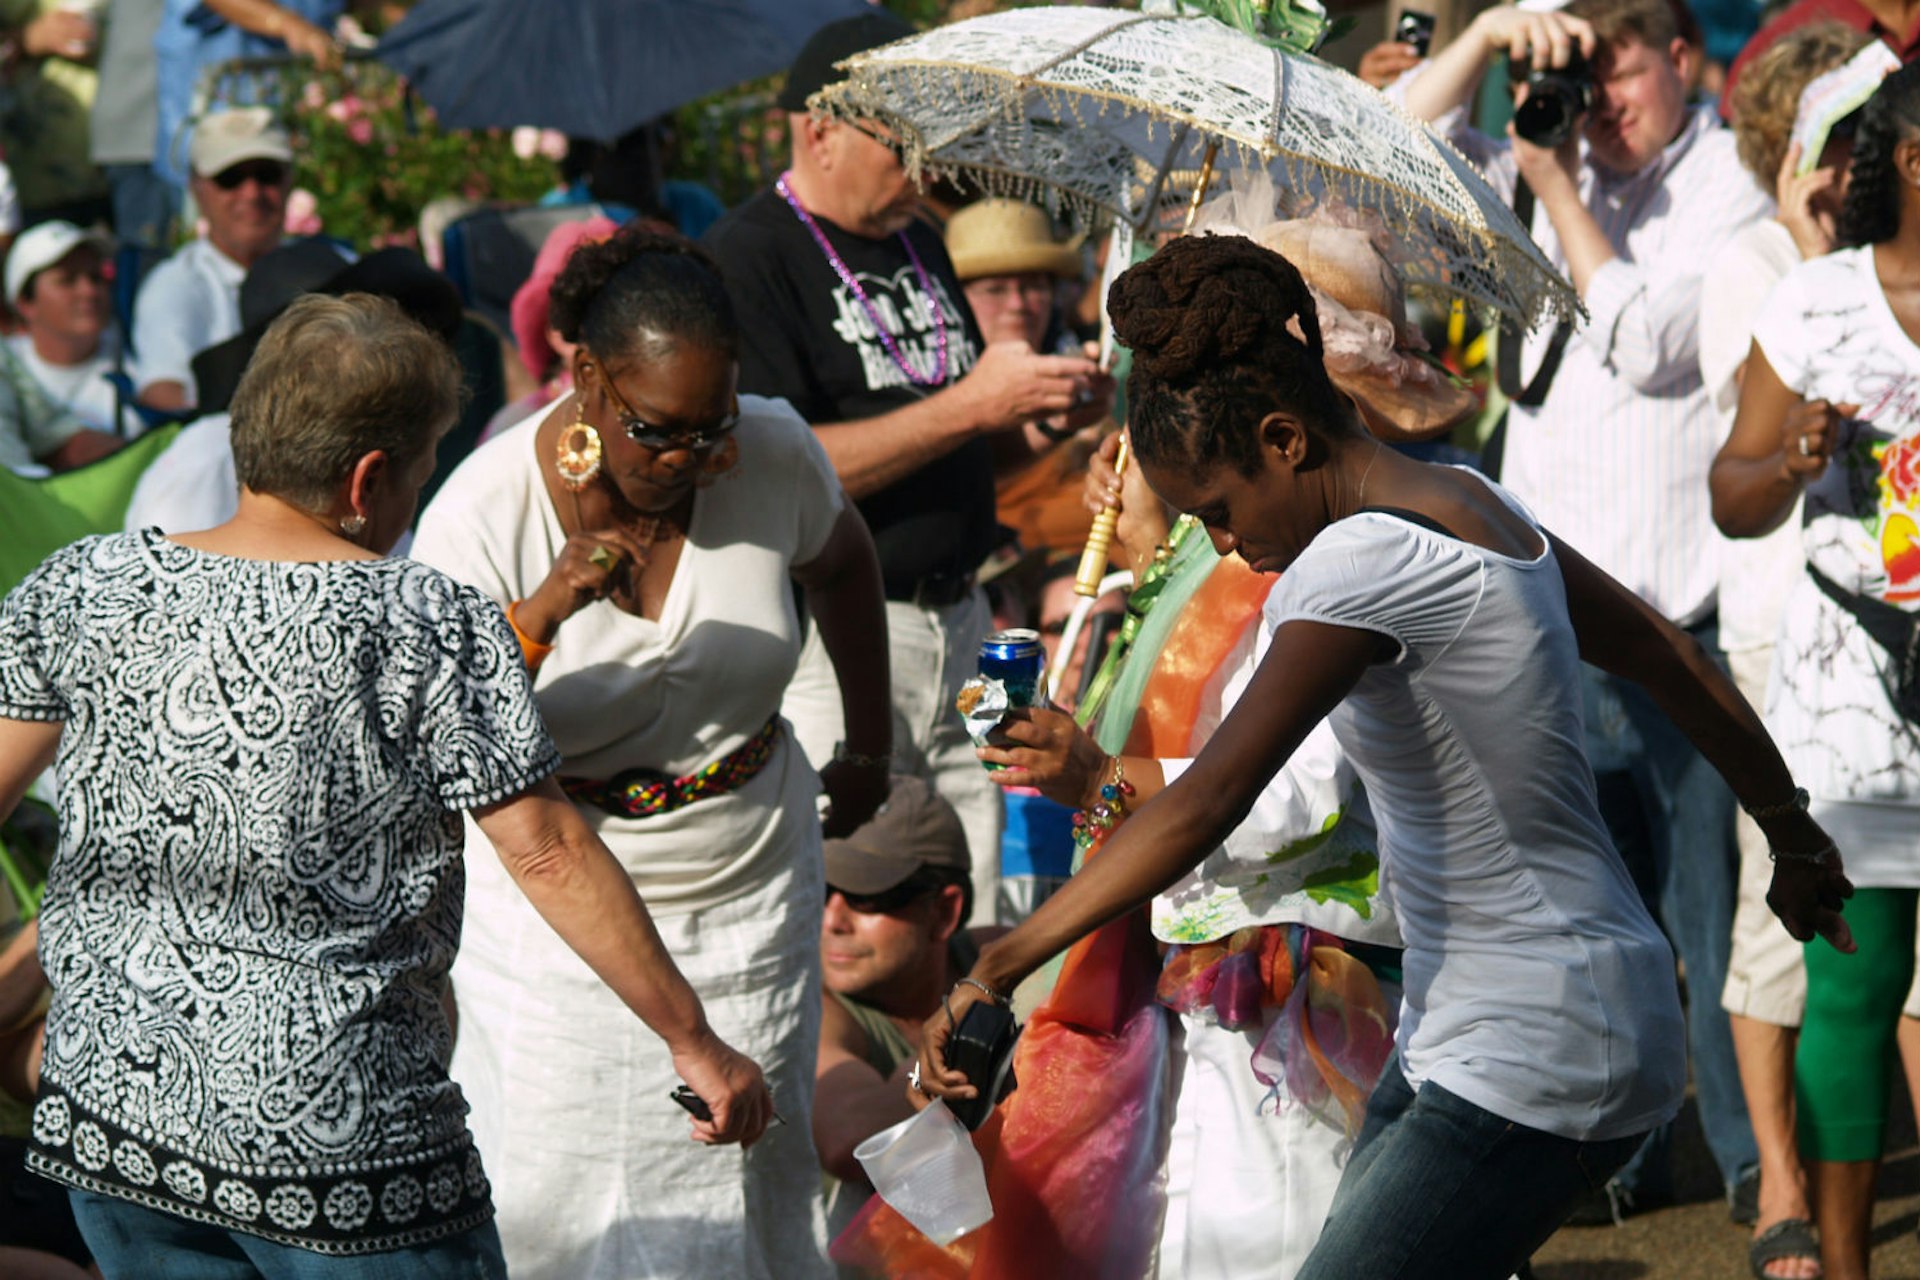 Dancing at a local Mardi Gras celebration in New Orleans. Image courtesy of New Orleans Convention and Visitors Bureau.